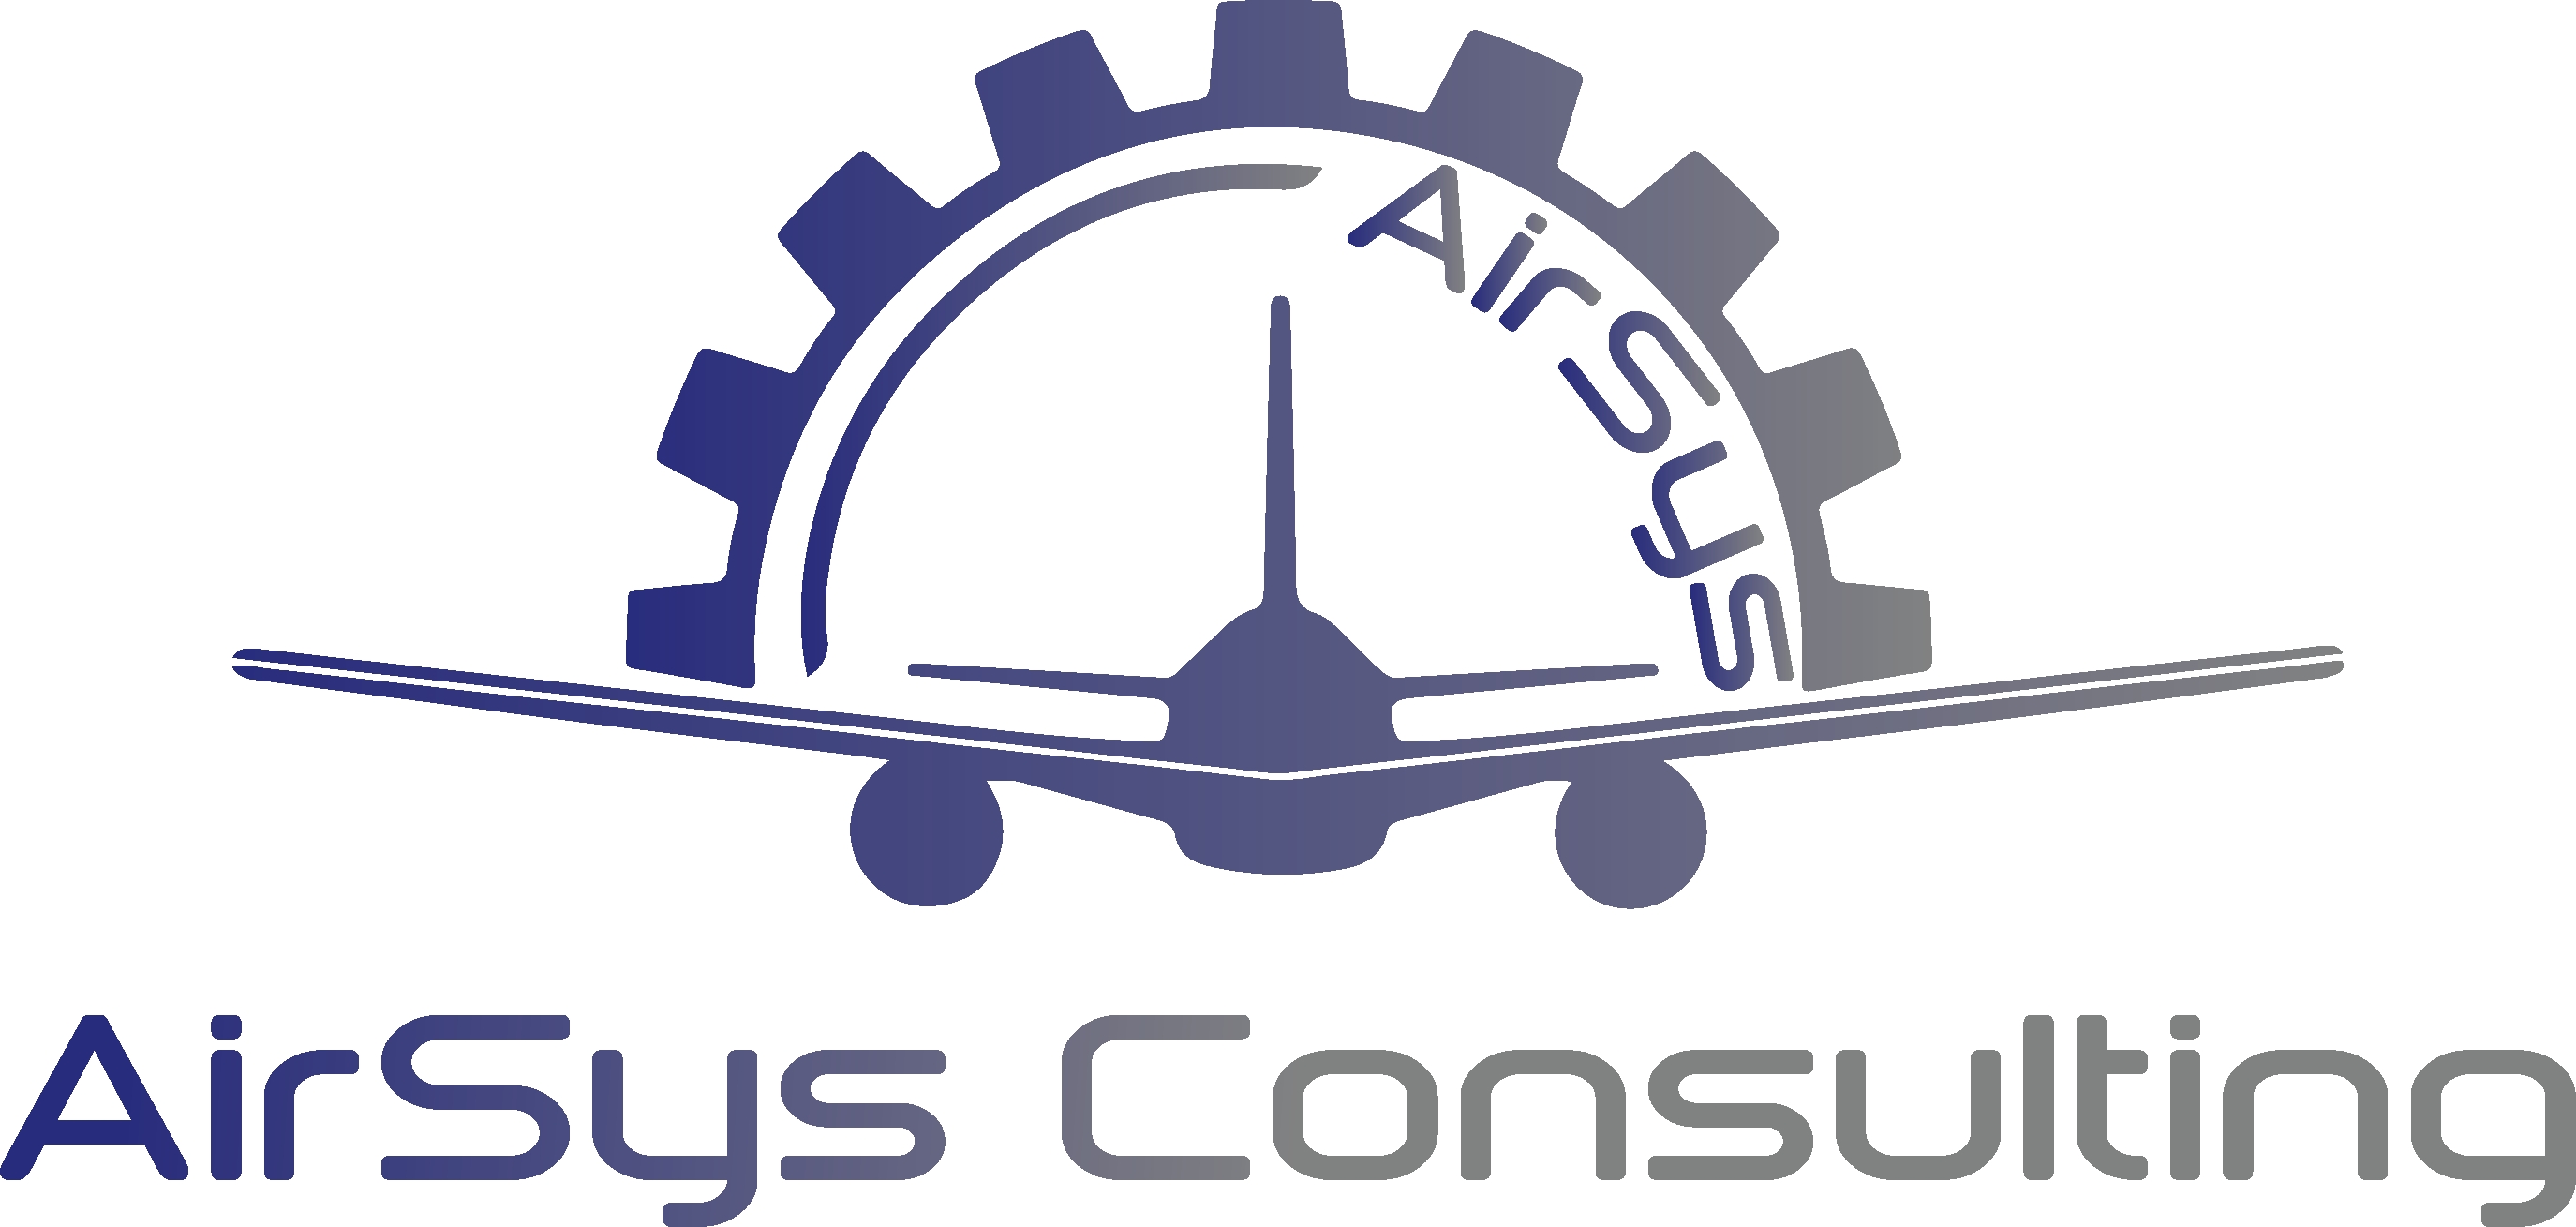 AirSys Consulting